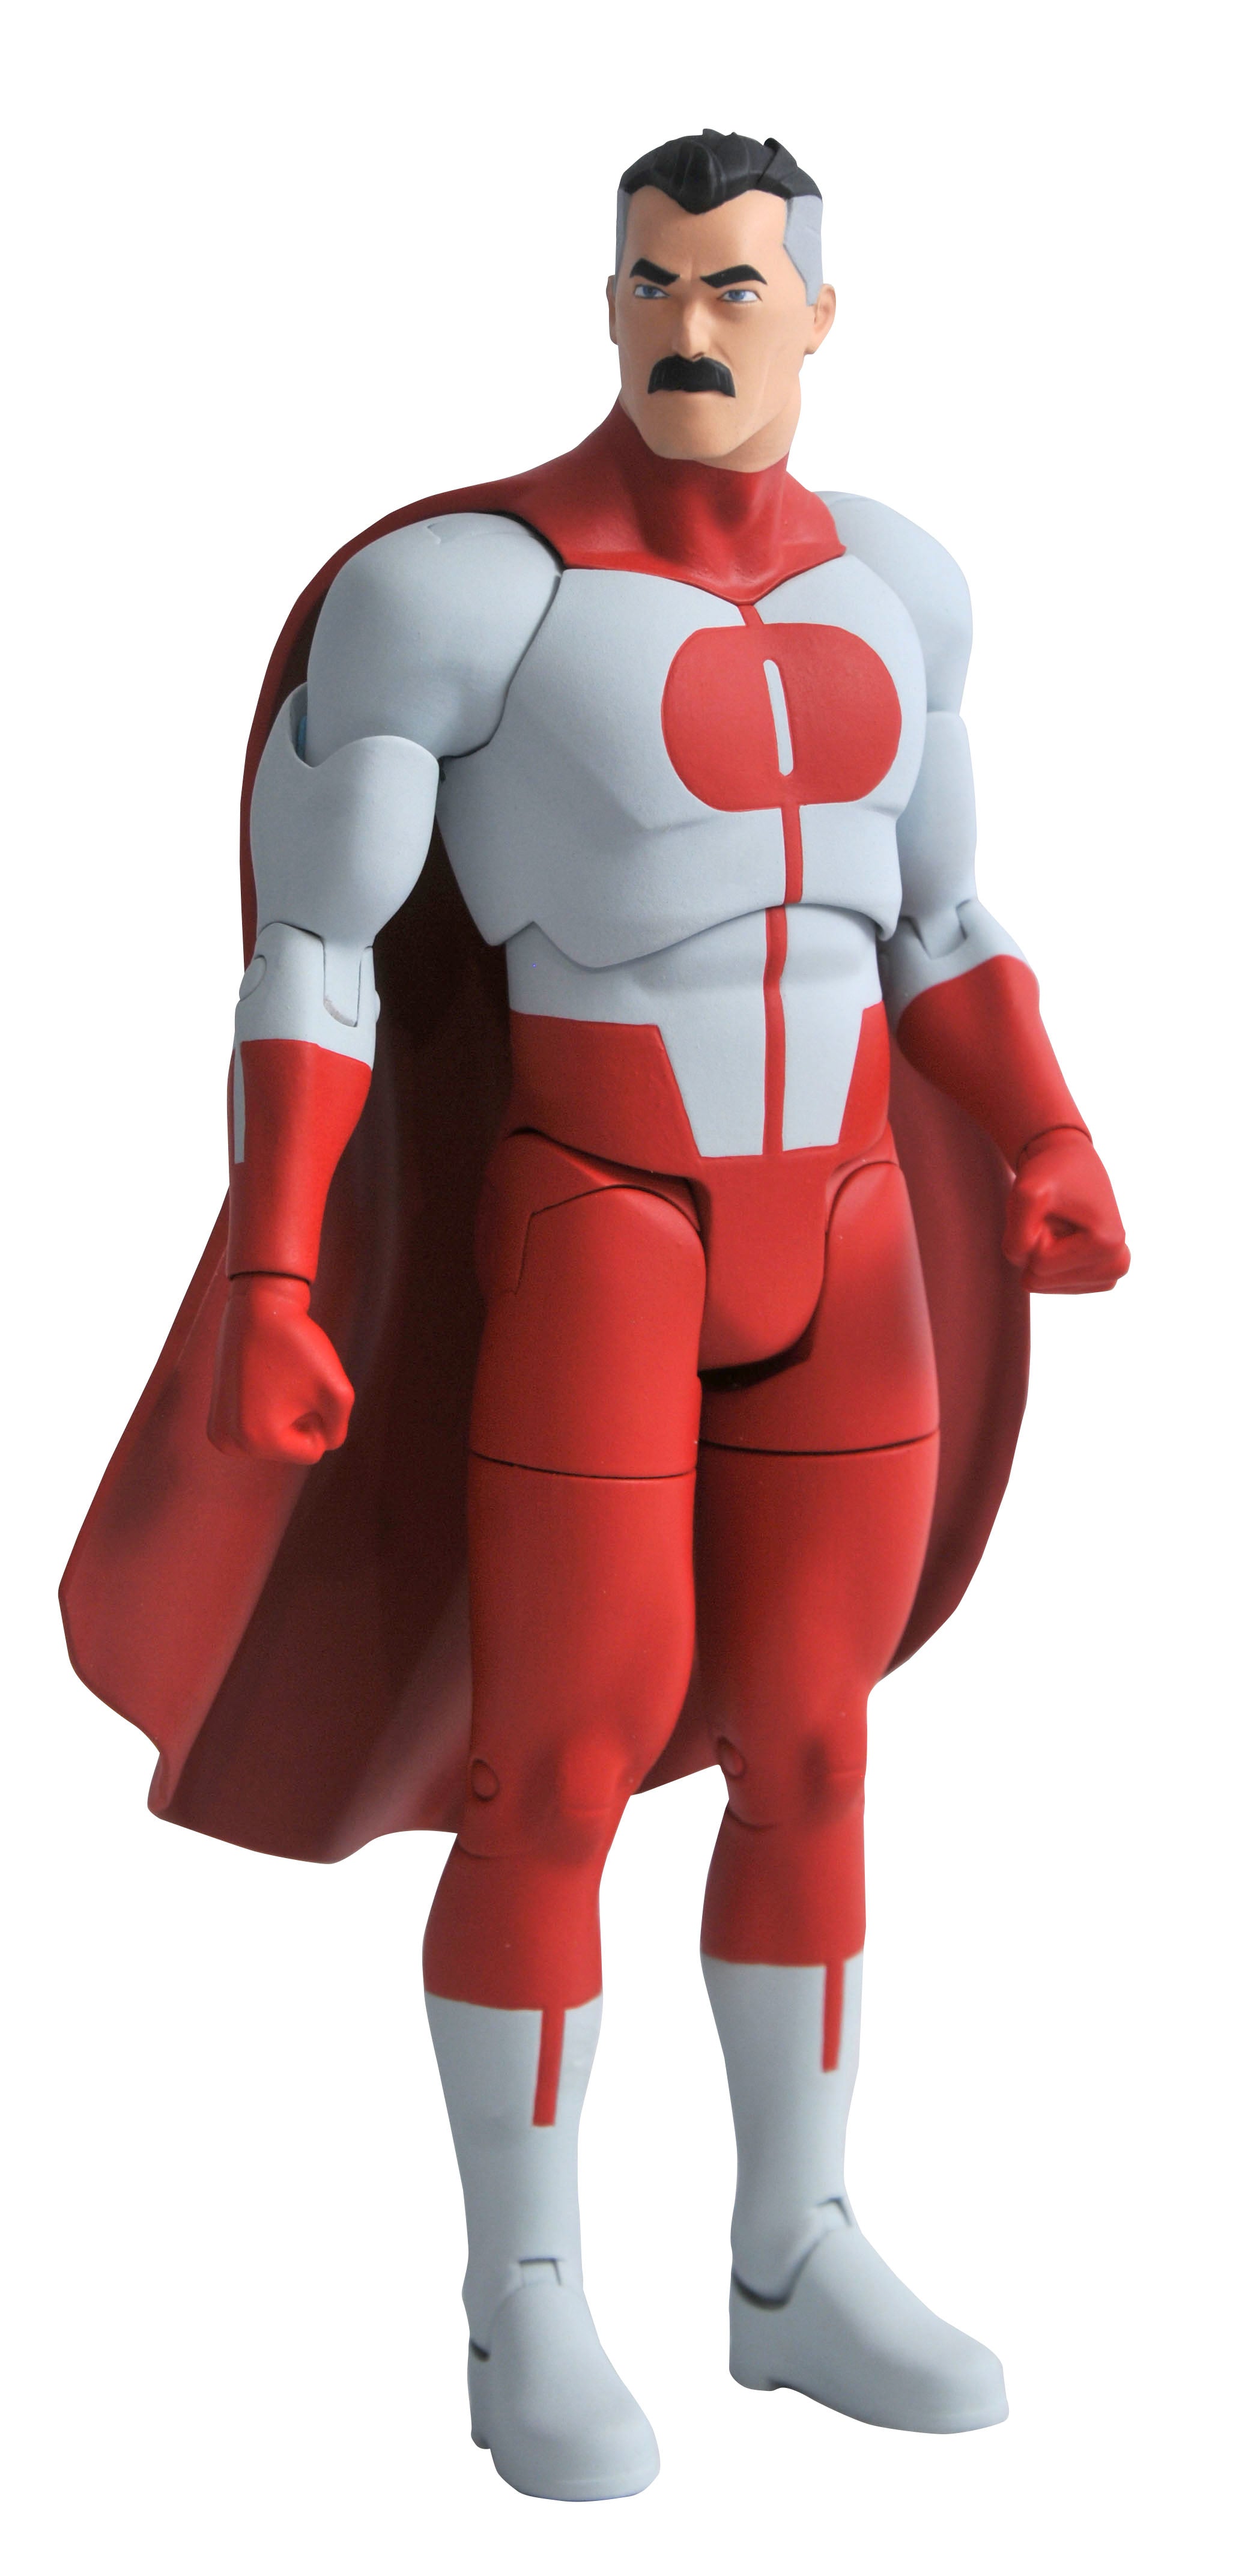 Invincible Series 1 Omni-Man Action Figure (Other)